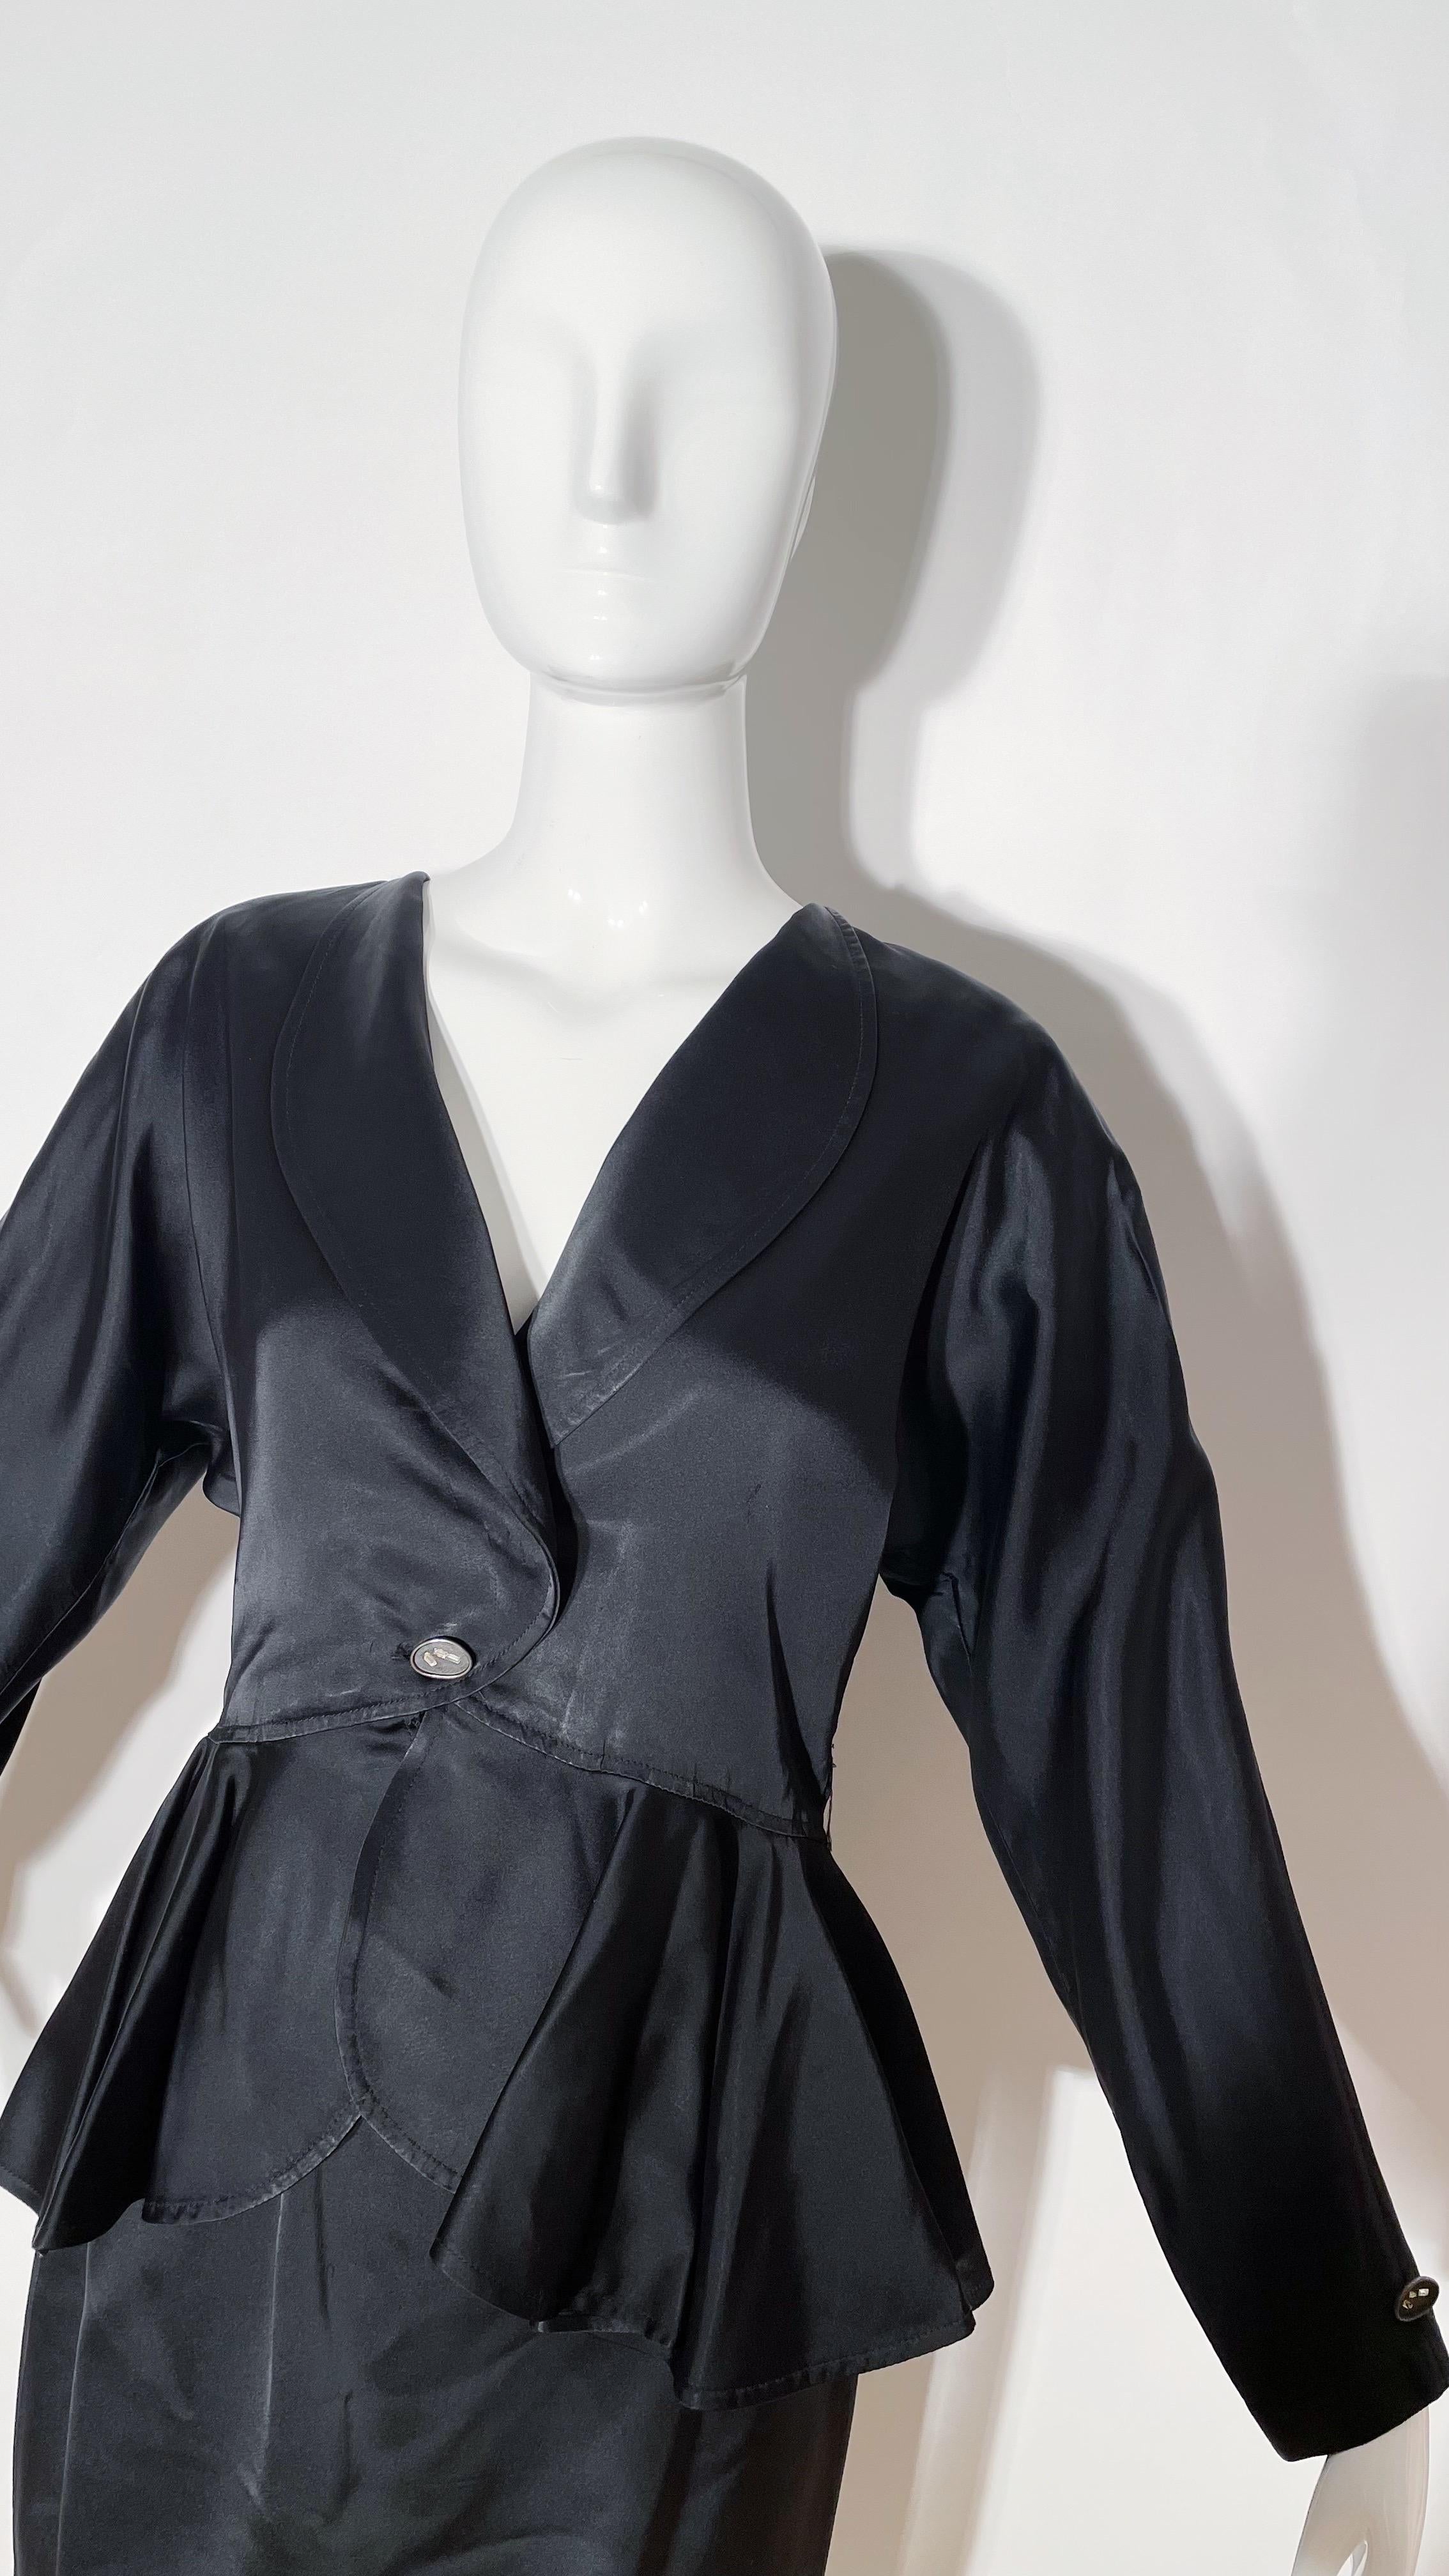 Black satin skirt suit. Peplum style blazer. Shoulder pads. Bat wing. Pencil skirt. Acetate. Made in England.
*Condition: Excellent vintage condition. No visible Flaws.

Measurements Taken Laying Flat (inches)—
Shoulder to Shoulder: 20 in.
Sleeve